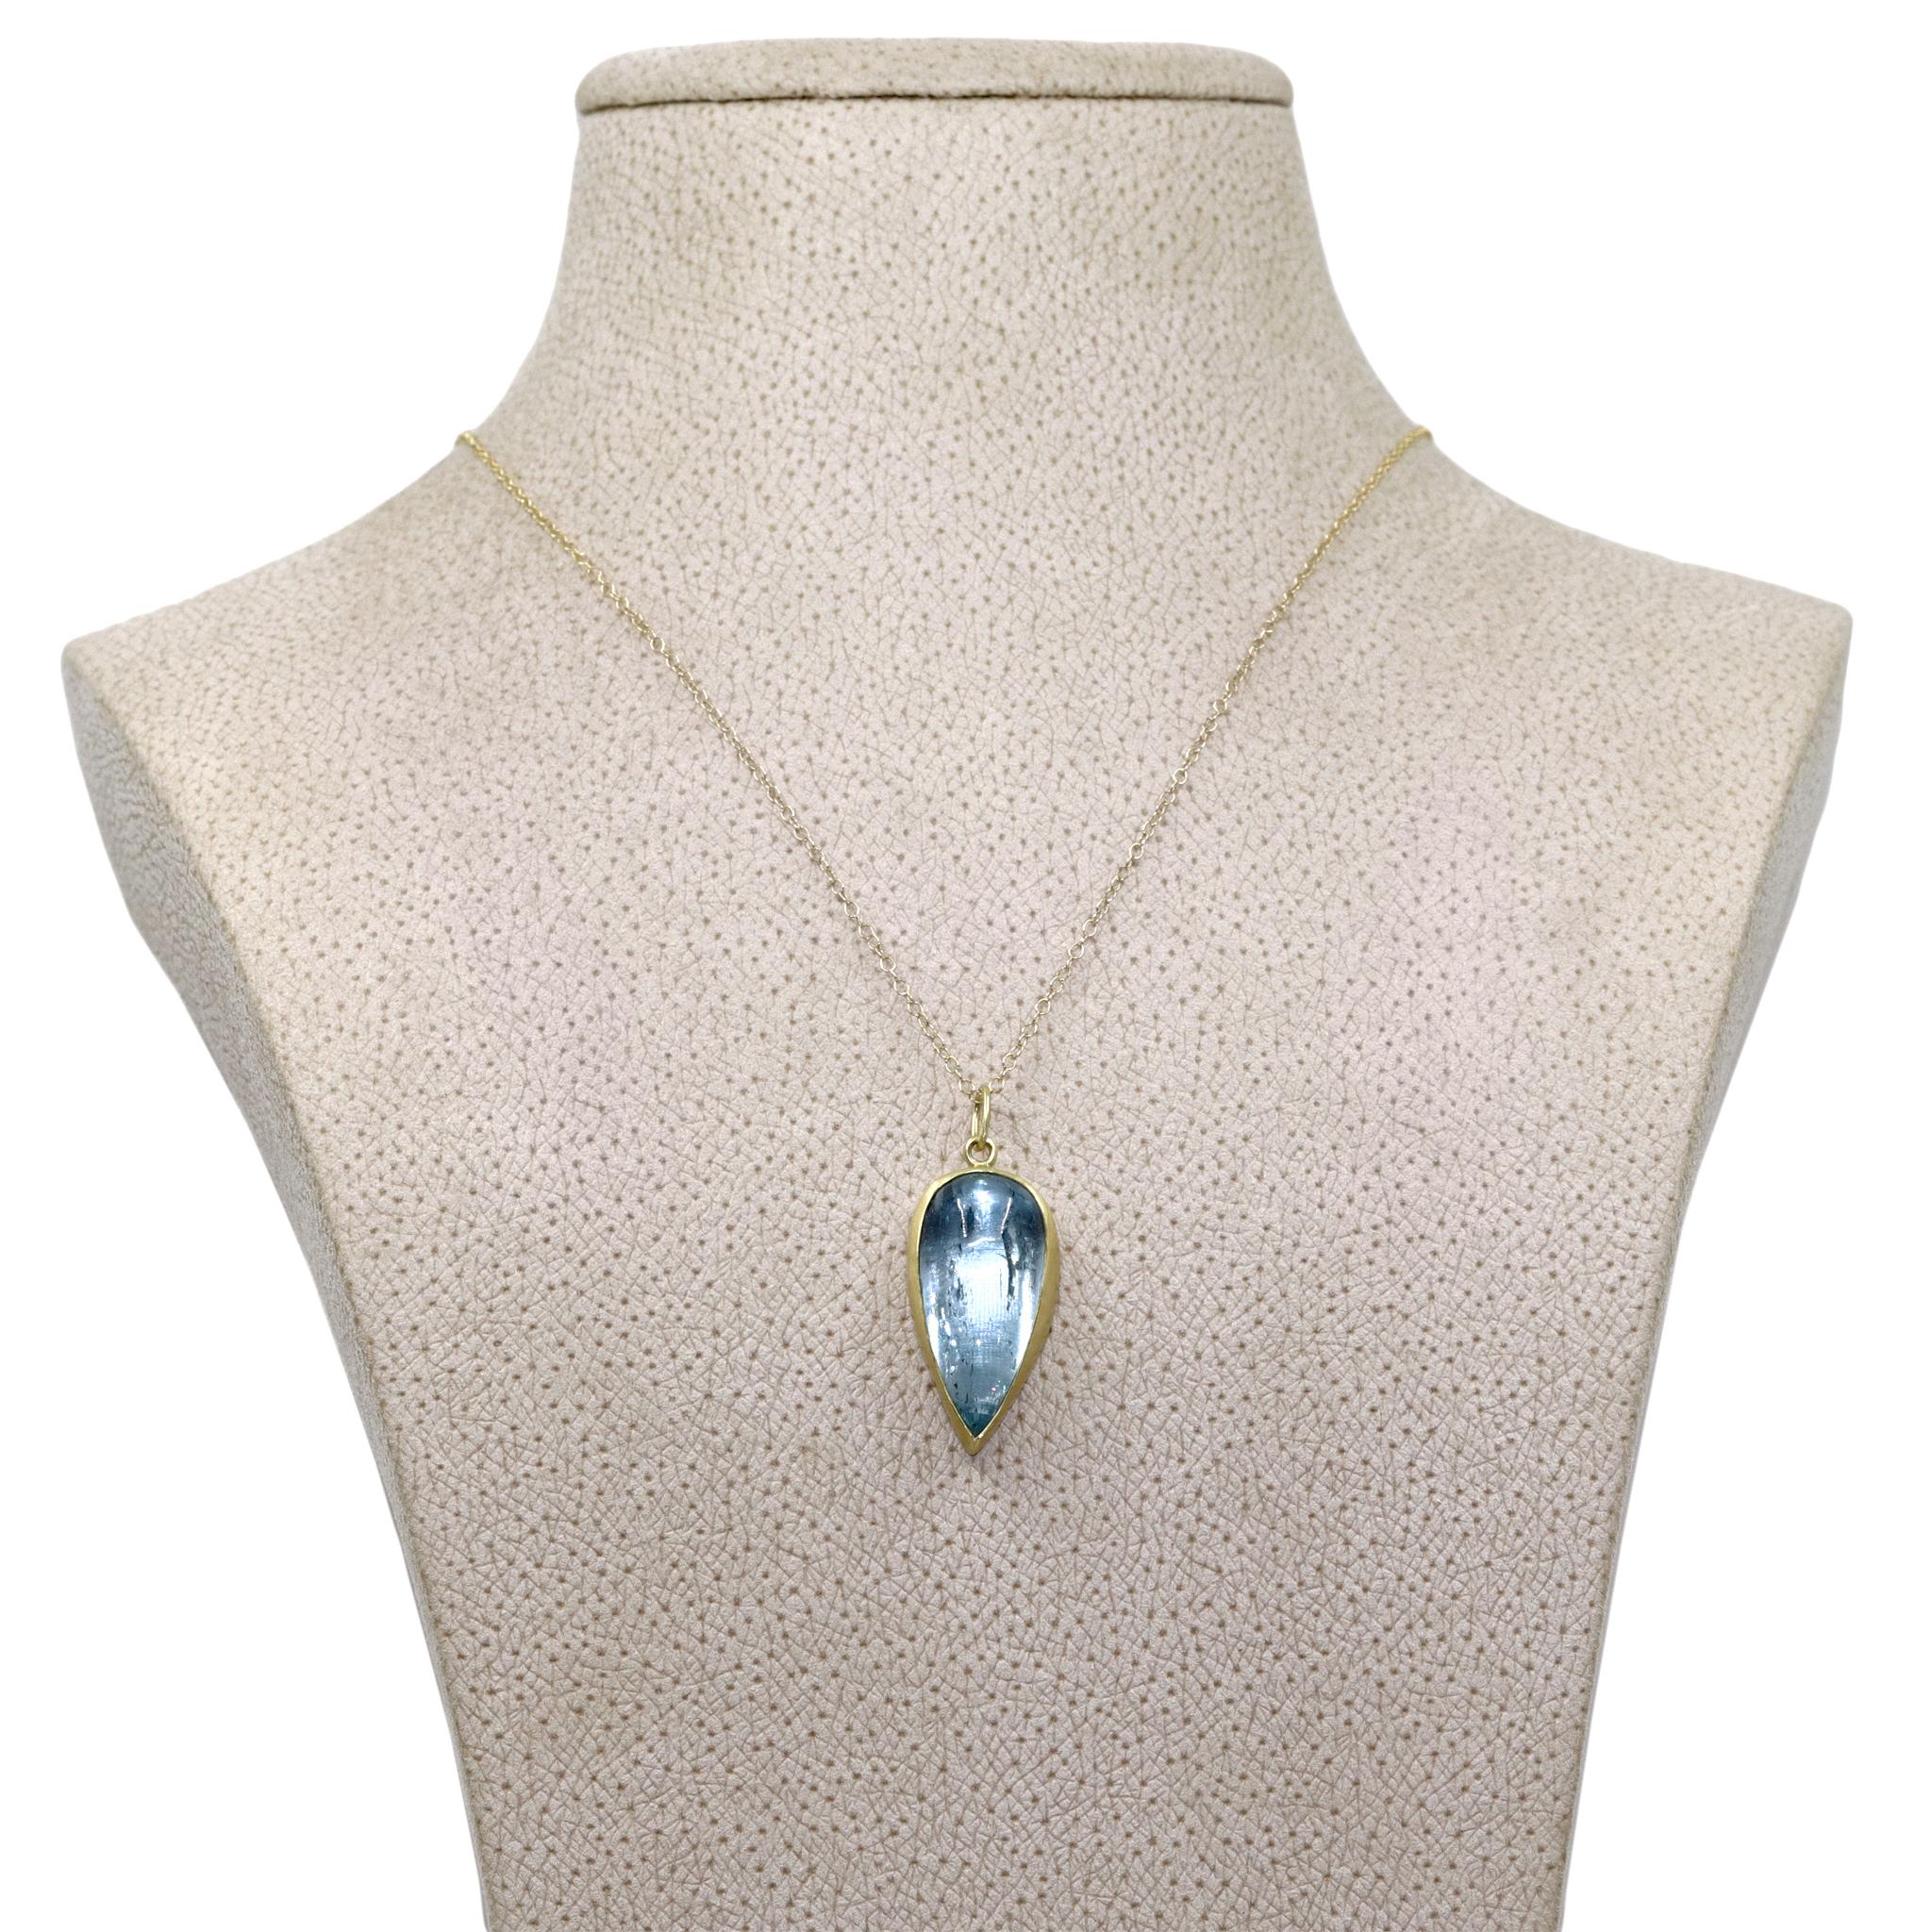 One of a Kind Drop Necklace handcrafted by jewelry maker Monica Marcella showcasing a gorgeous, three dimensional glowing aquamarine cabochon bezel-set in matte-finished 18k yellow gold on an 18 inch long 18k yellow gold chain. Total necklace length